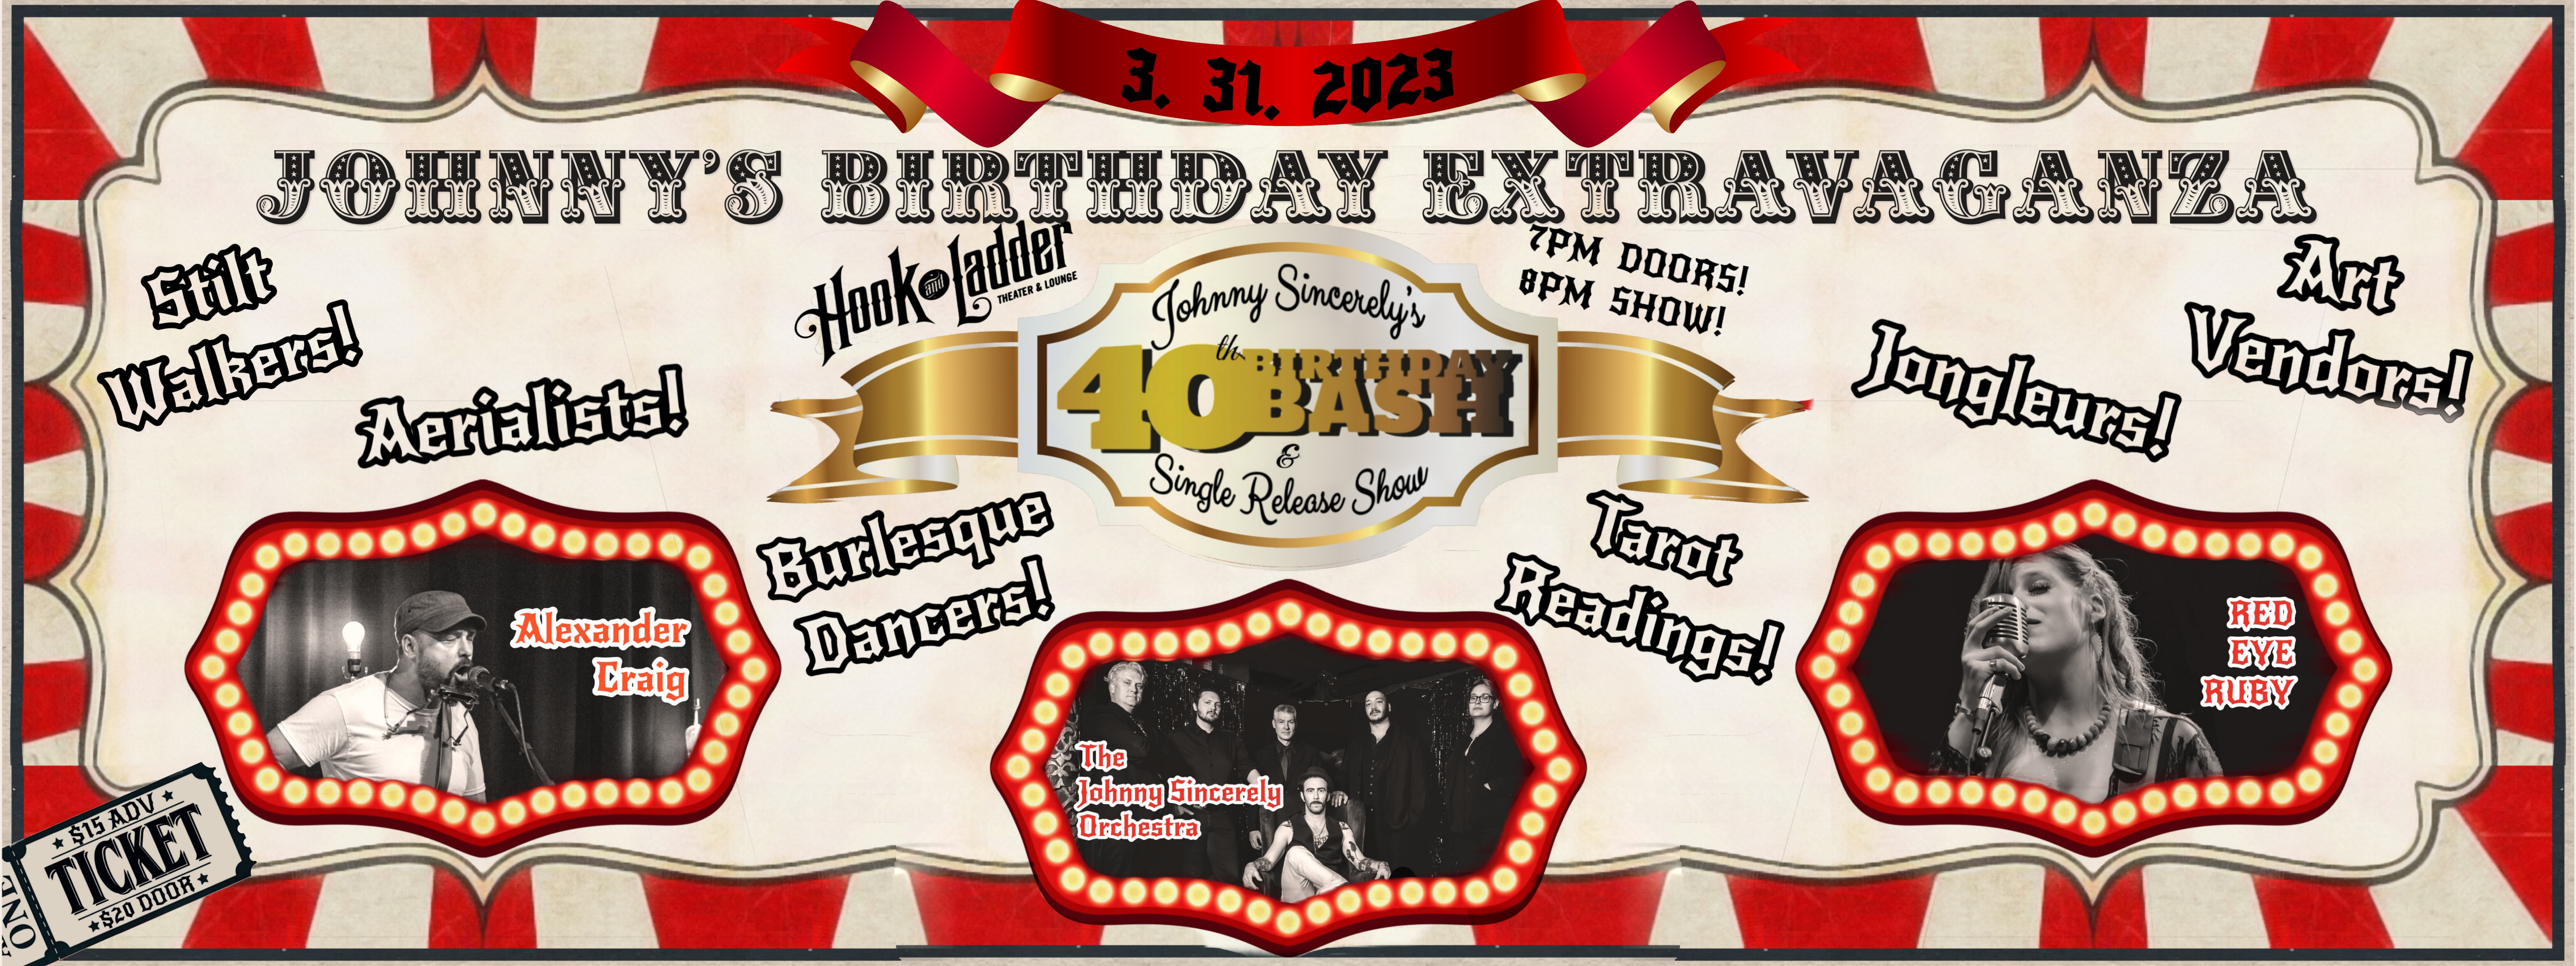 Johnny Sincerely's Birthday Extravaganza! w/ Red Eye Ruby, Alexander Craig, and The Johnny Sincerely Orchestra Friday, March 31st The Hook and Ladder Theater Doors 7:00pm :: Music 8:00pm :: 21+ General Admission * $15 ADV / $20 DOS * Does not include fees NO REFUNDS